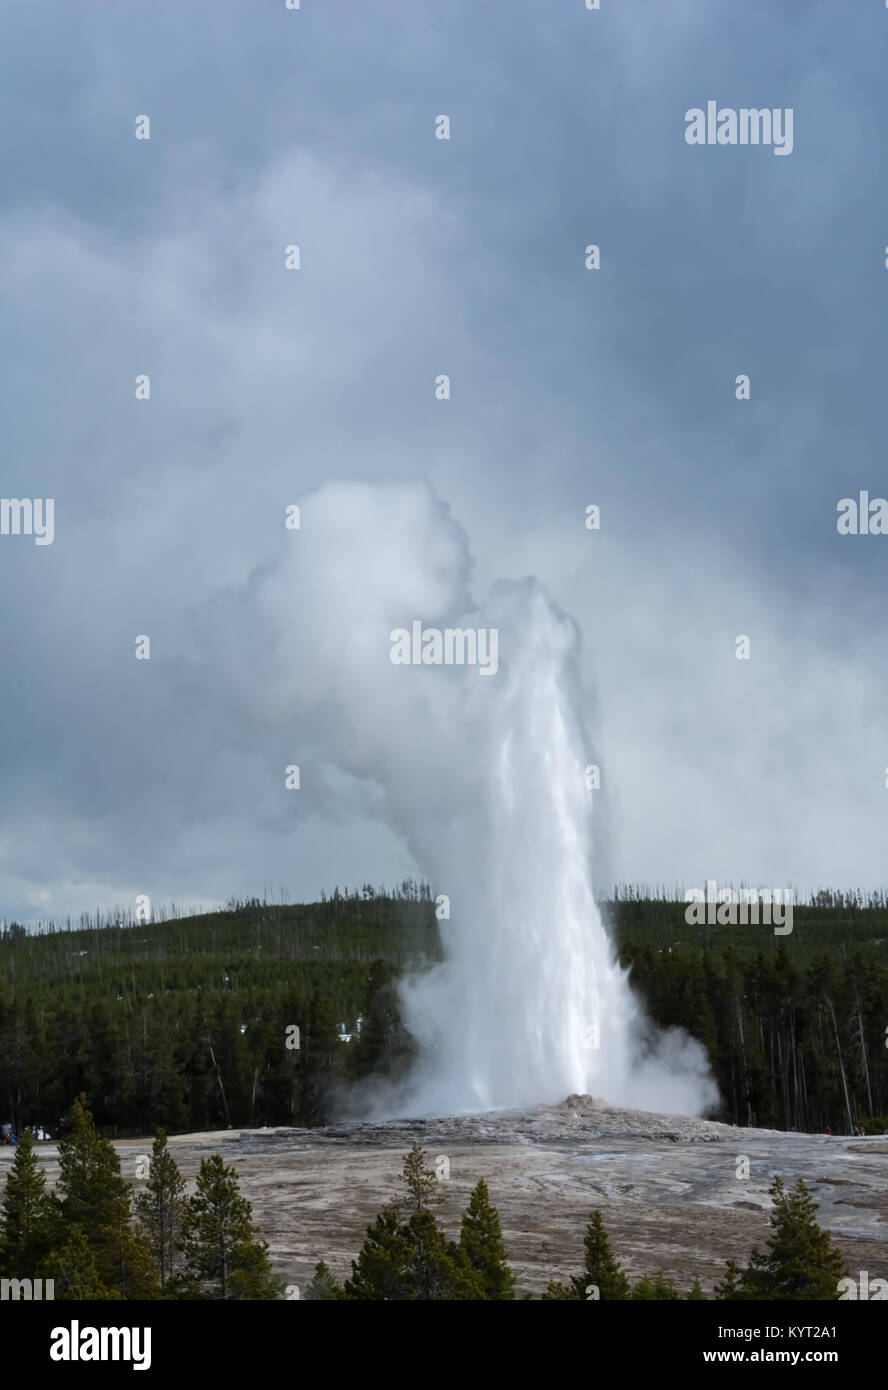 A coumn of water and steam jets higher than the sorounding hills once again as Old Faithful erupts. Stock Photo